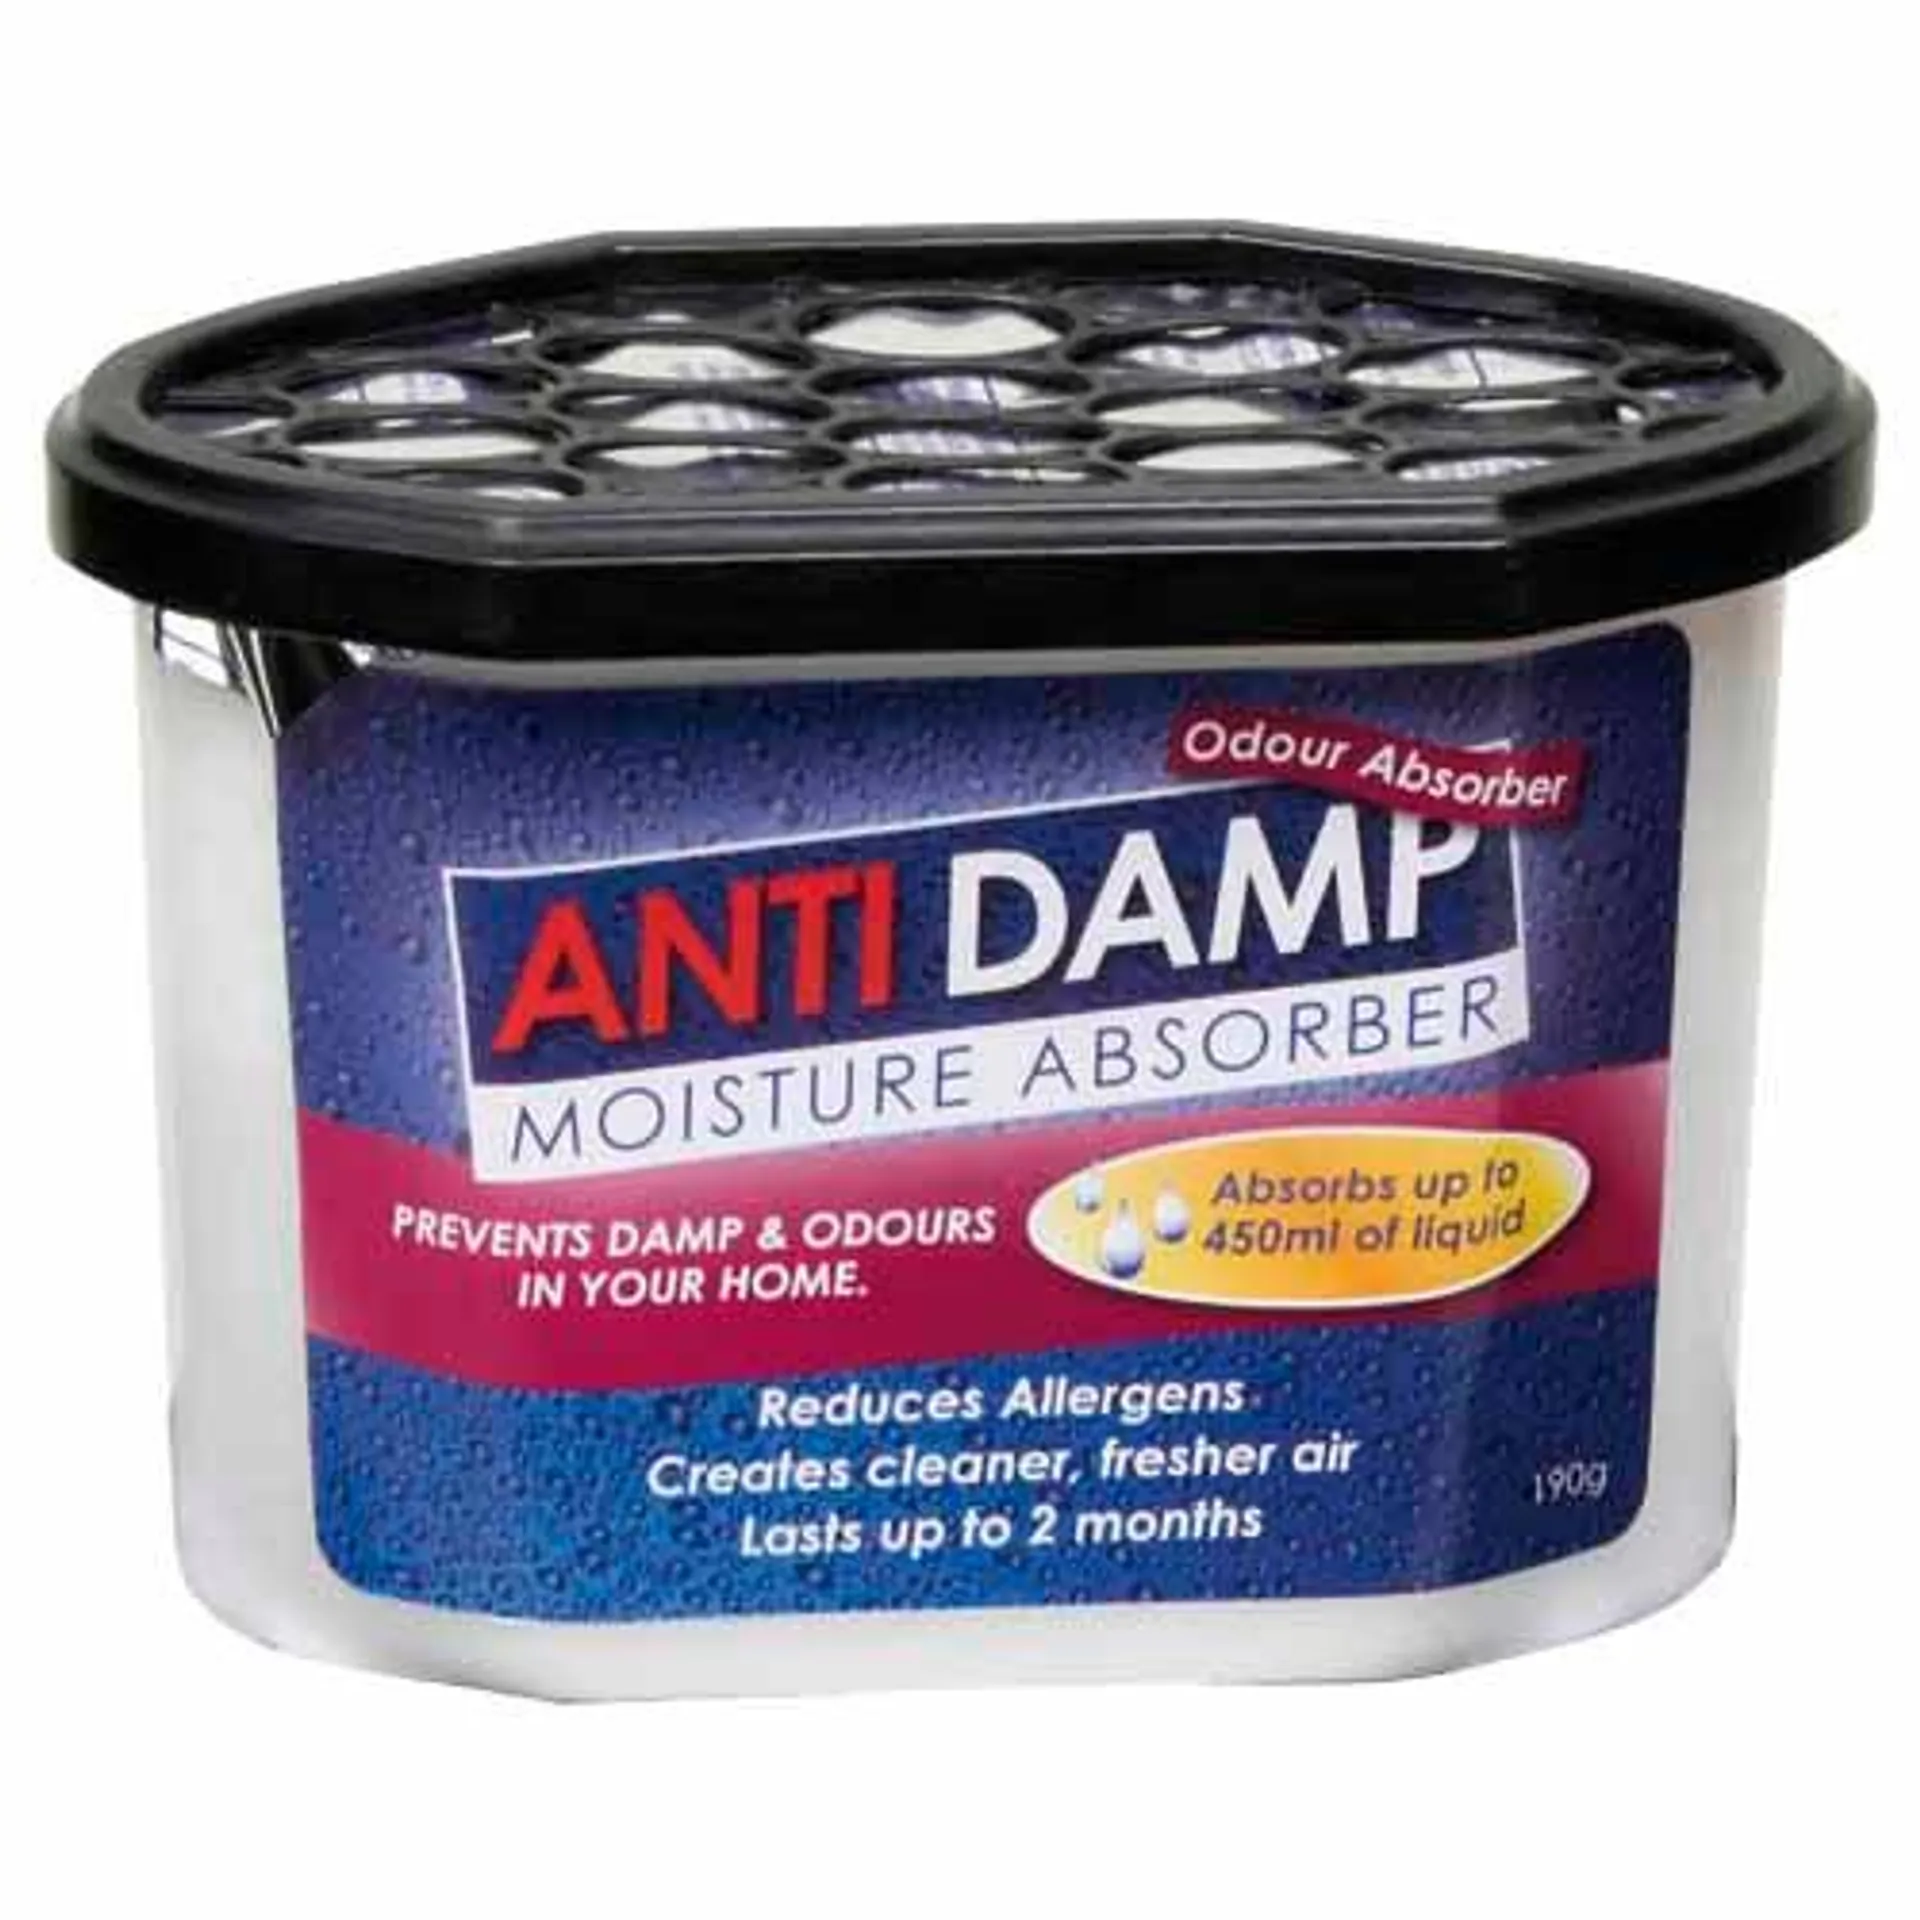 Anti Damp Moisture Absorbers pack of 3 190g each White